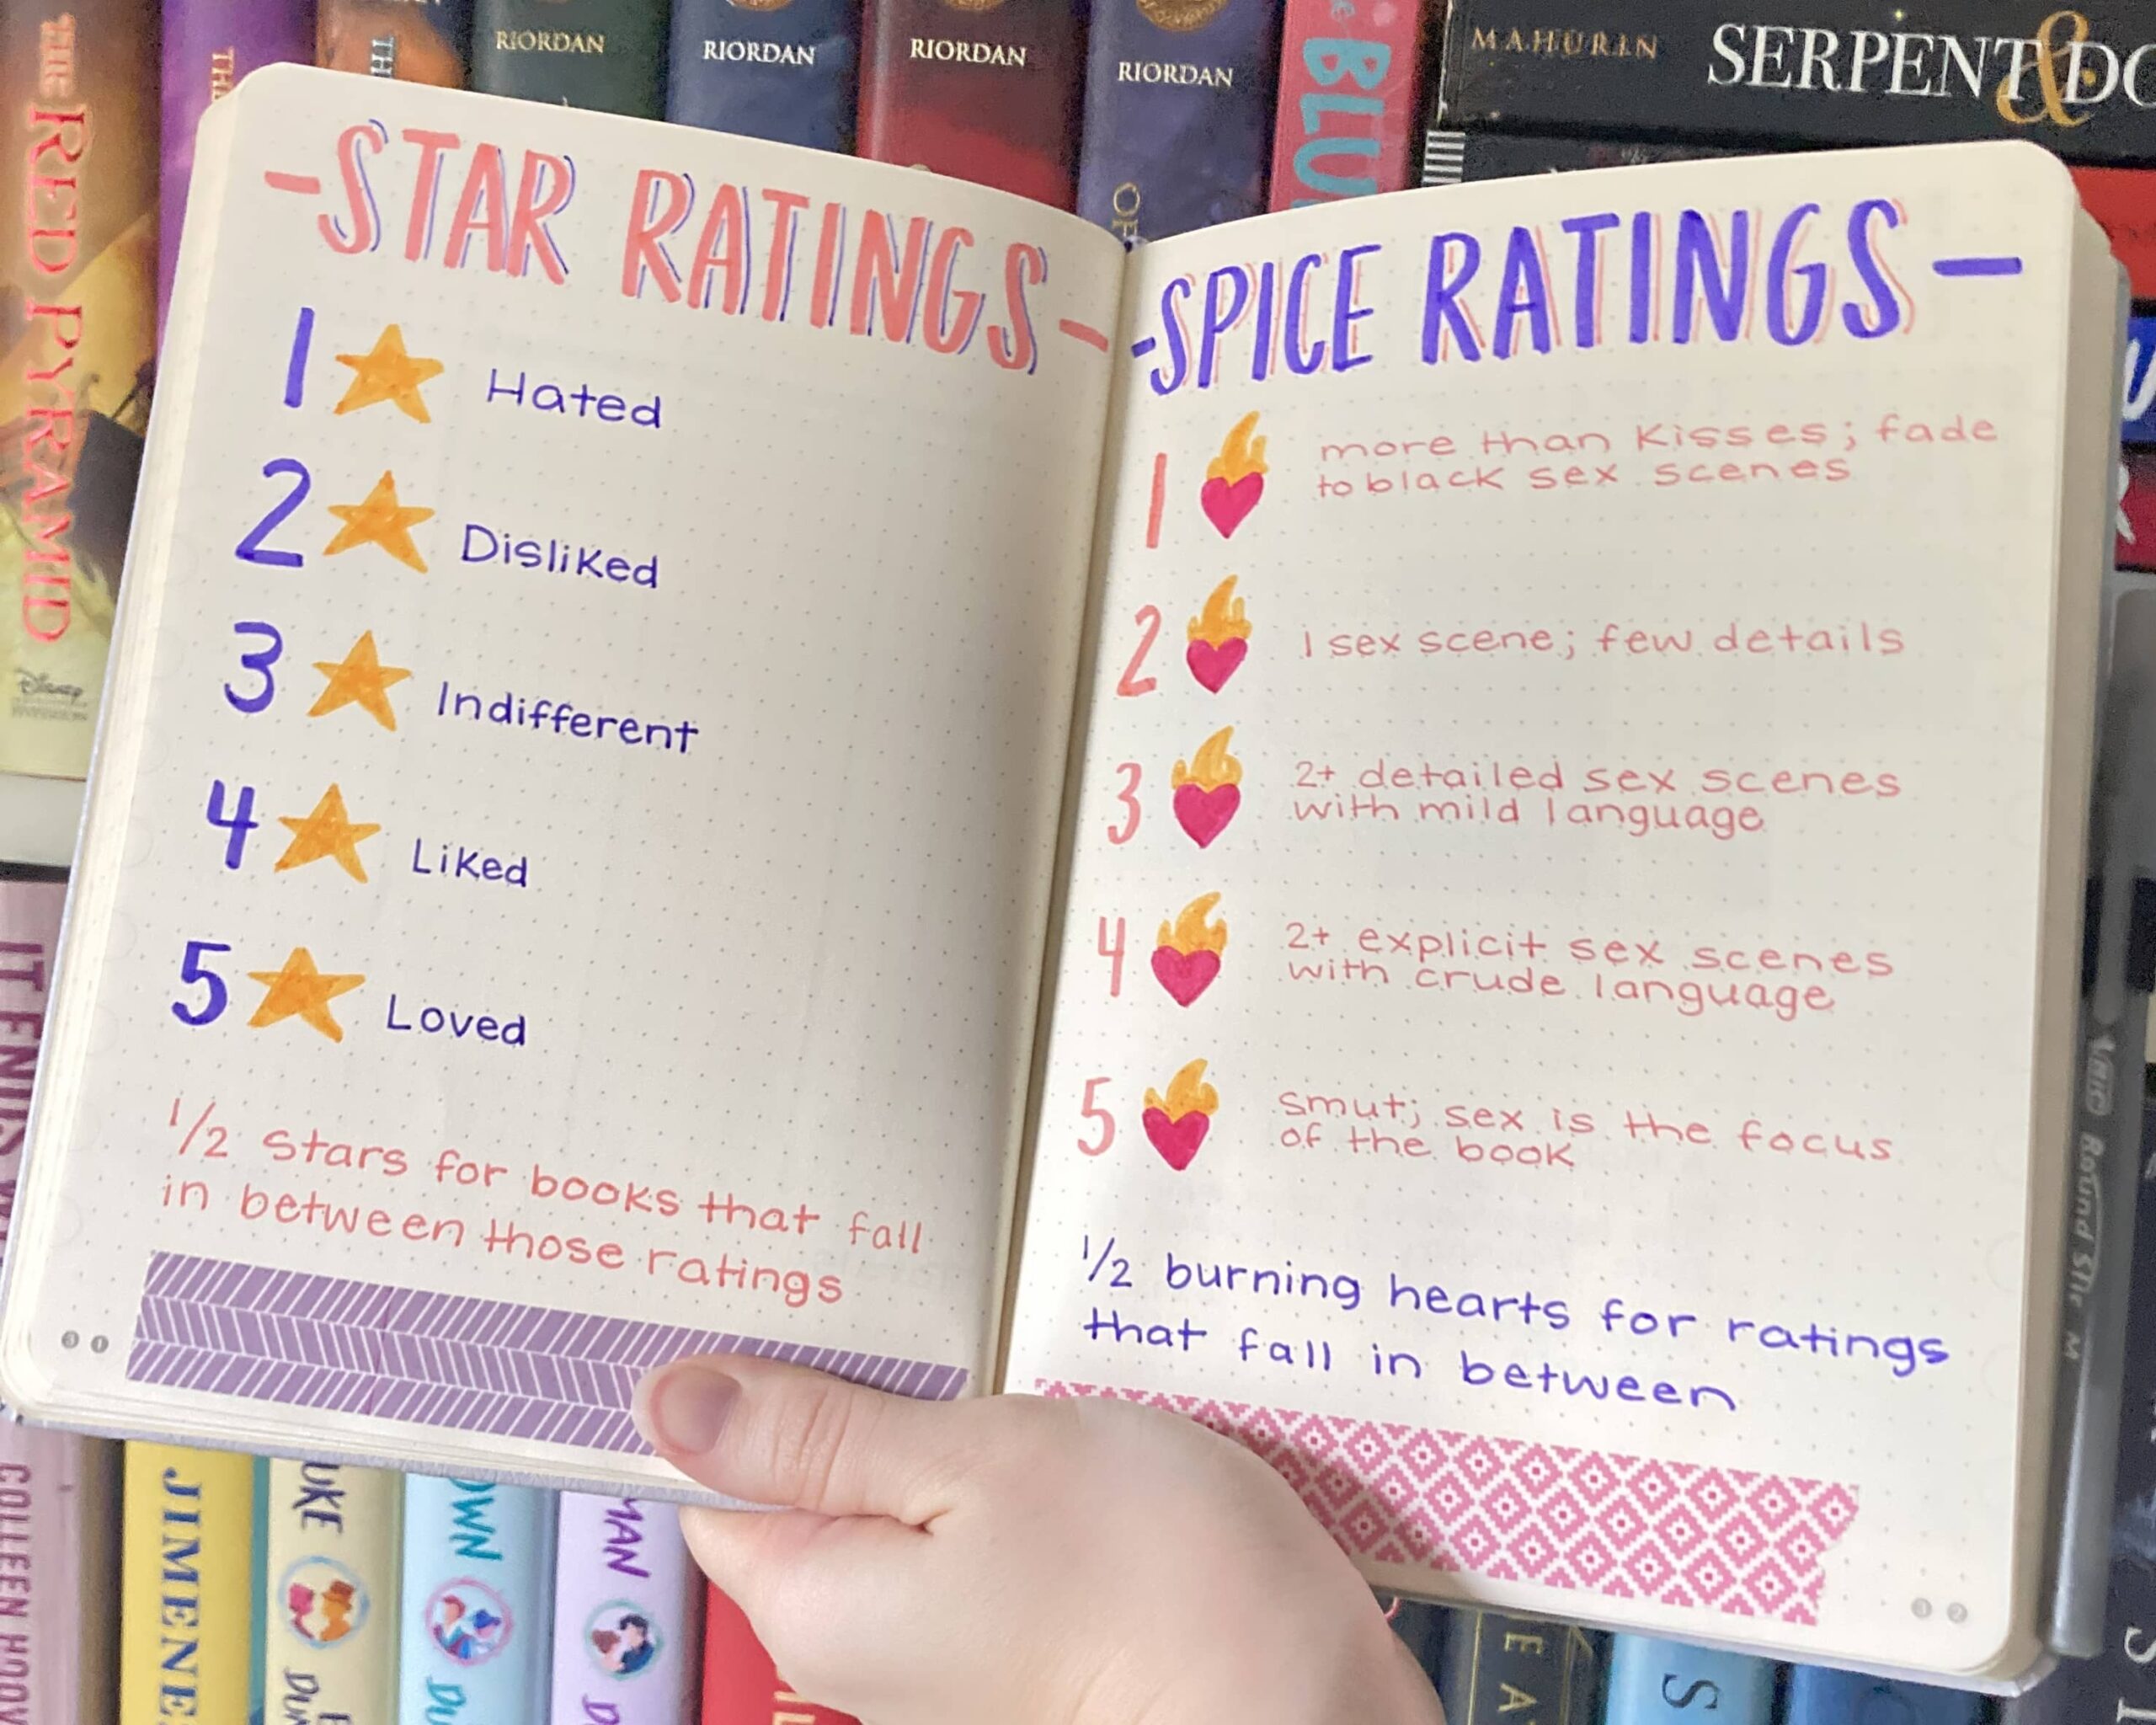 Rating Systems rating journal pages